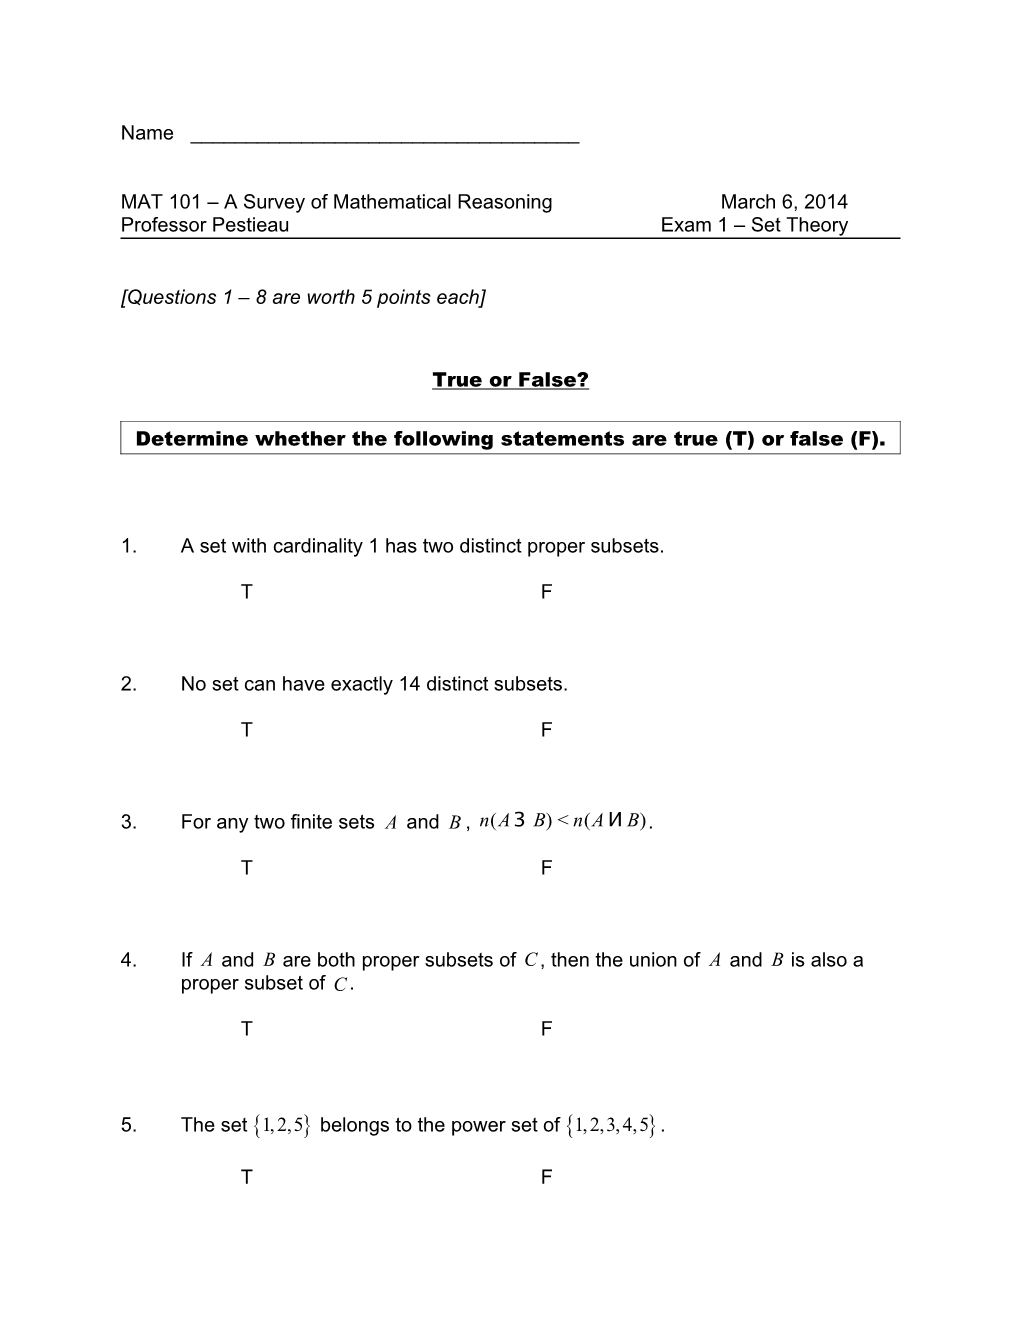 Determine Whether the Following Statements Are True (T) Or False (F)